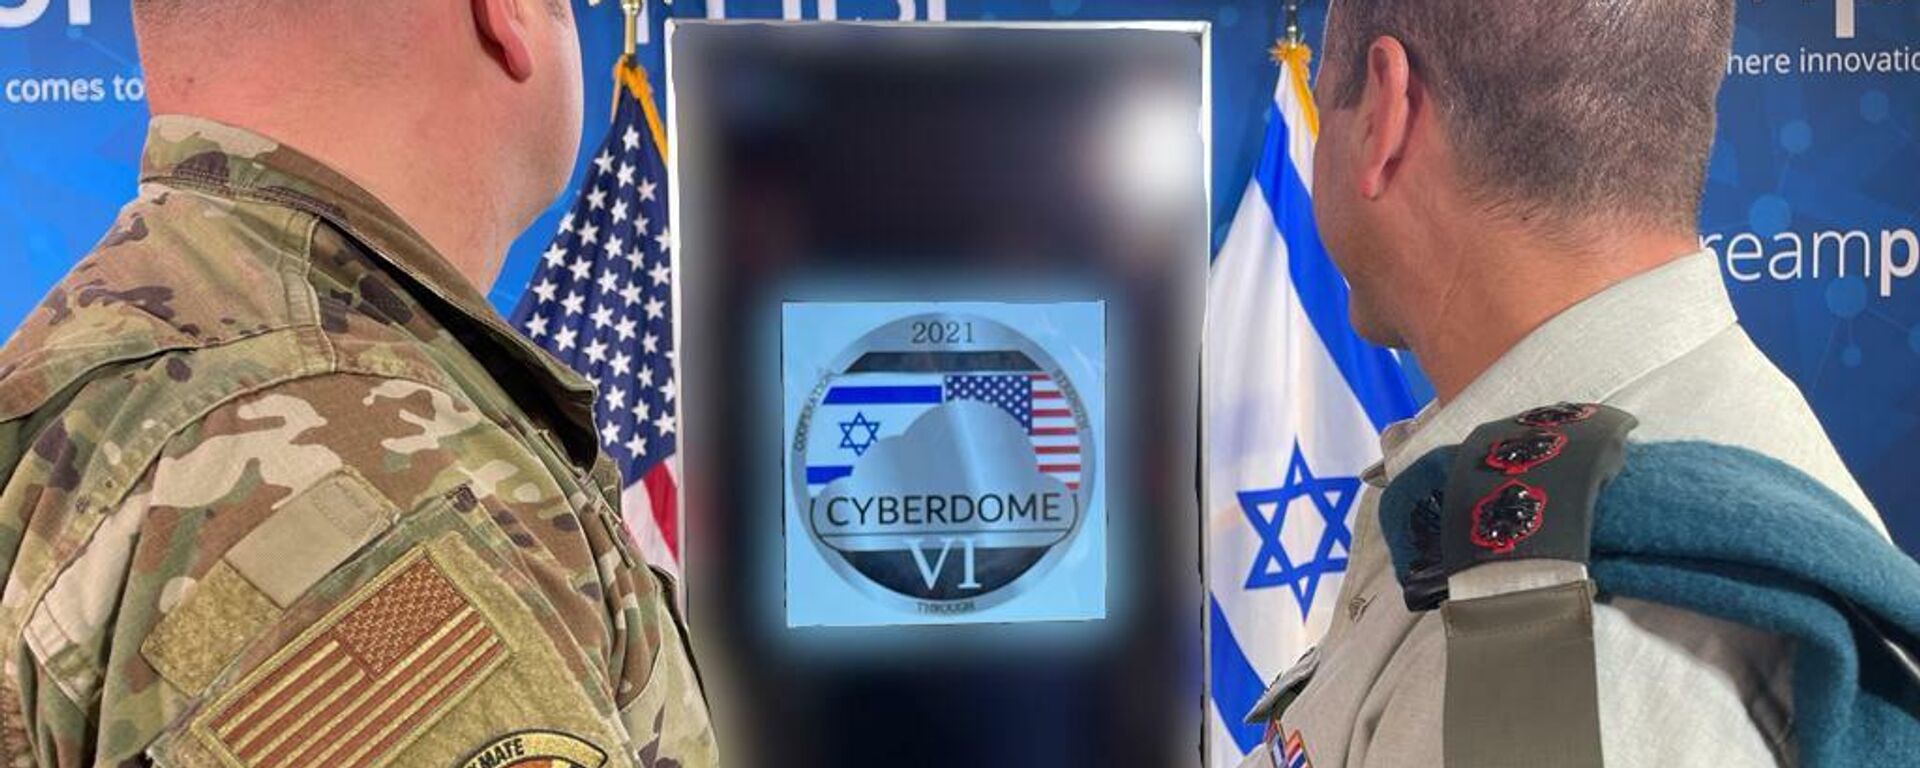 IDF handout published 18 December 2021 of US and Israeli personnel at teh Cyberdome VI drills at a US Cyber Command facility. - Sputnik International, 1920, 19.12.2021